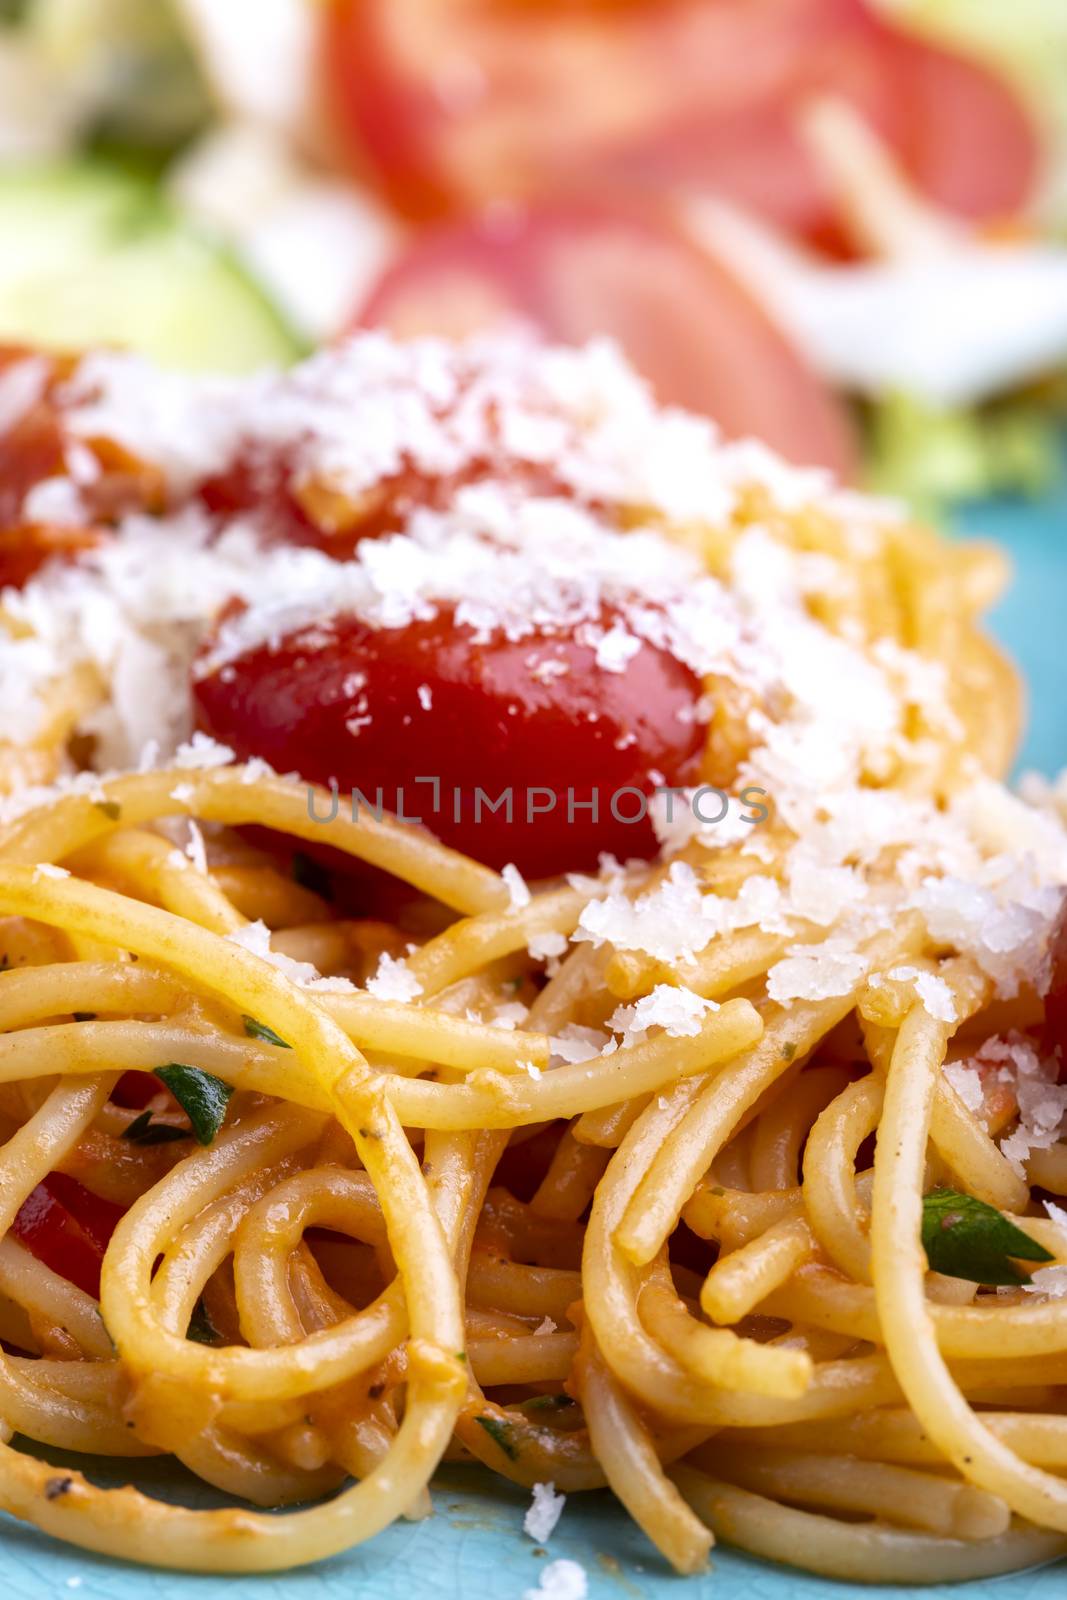 spaghetti pasta with cherry tomatoes by bernjuer